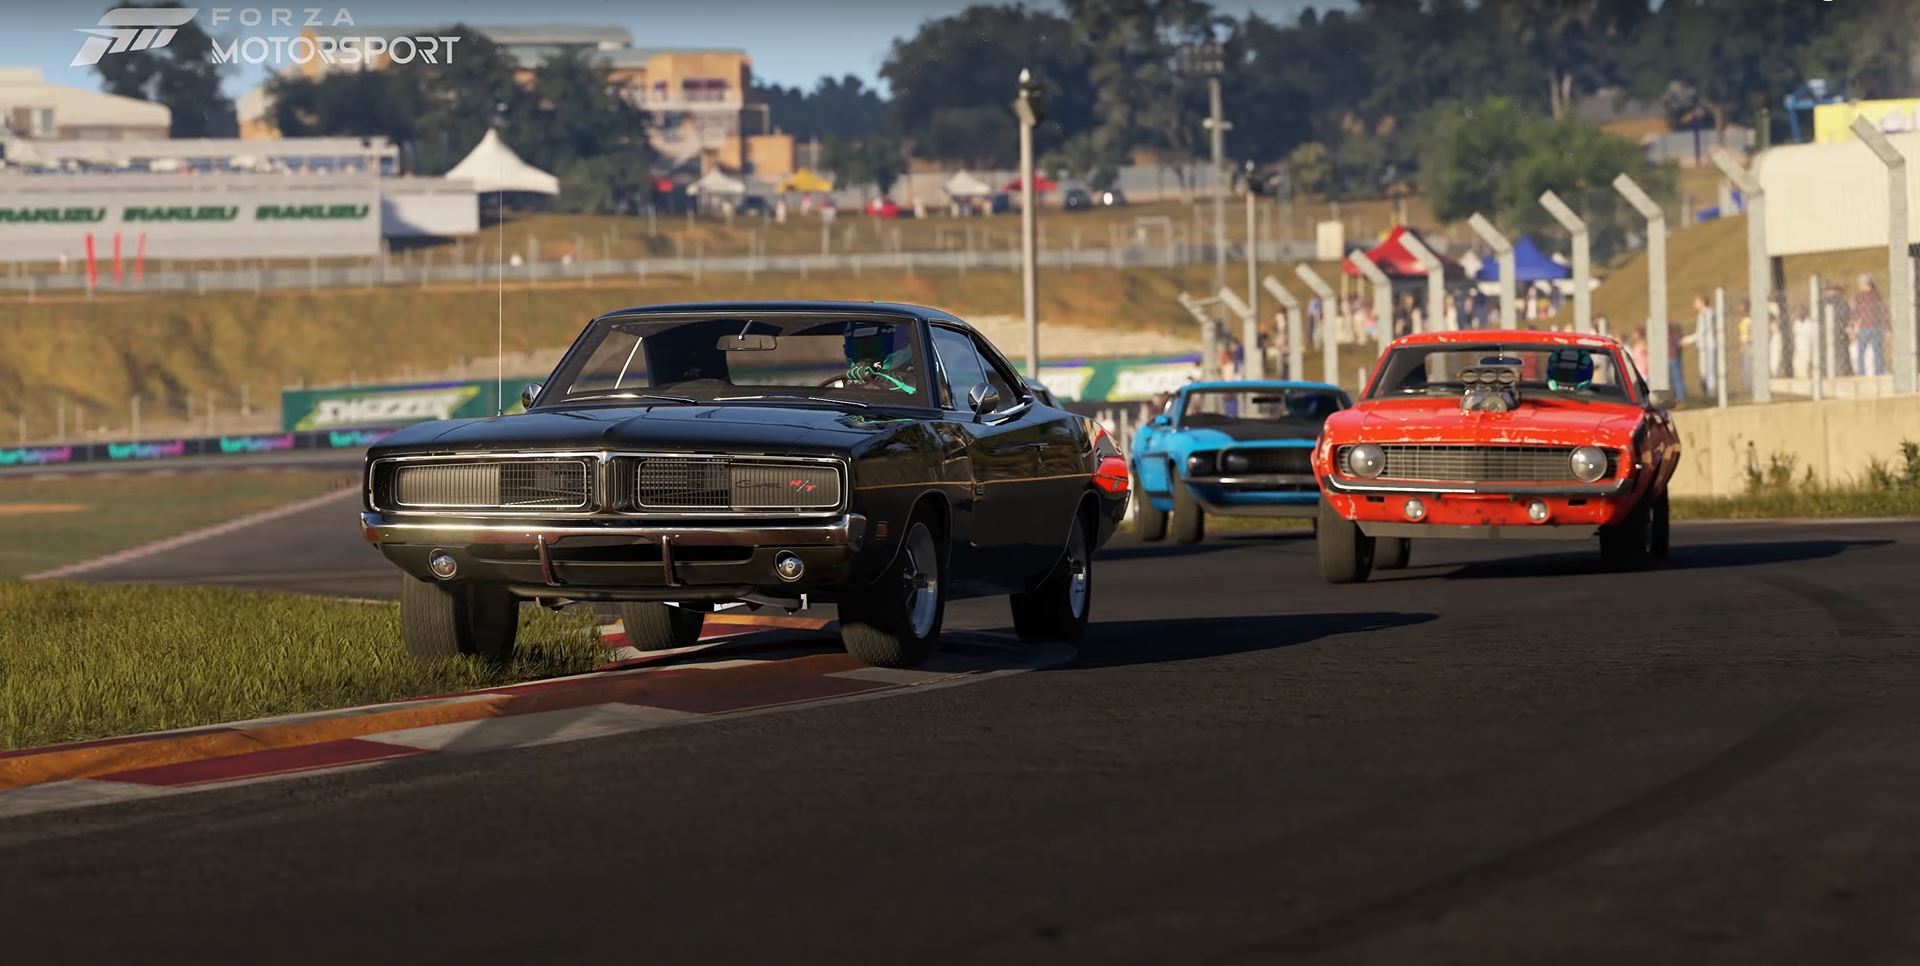 Forza Motorsport Is Looking Fantastic, But it's Not Coming This Spring